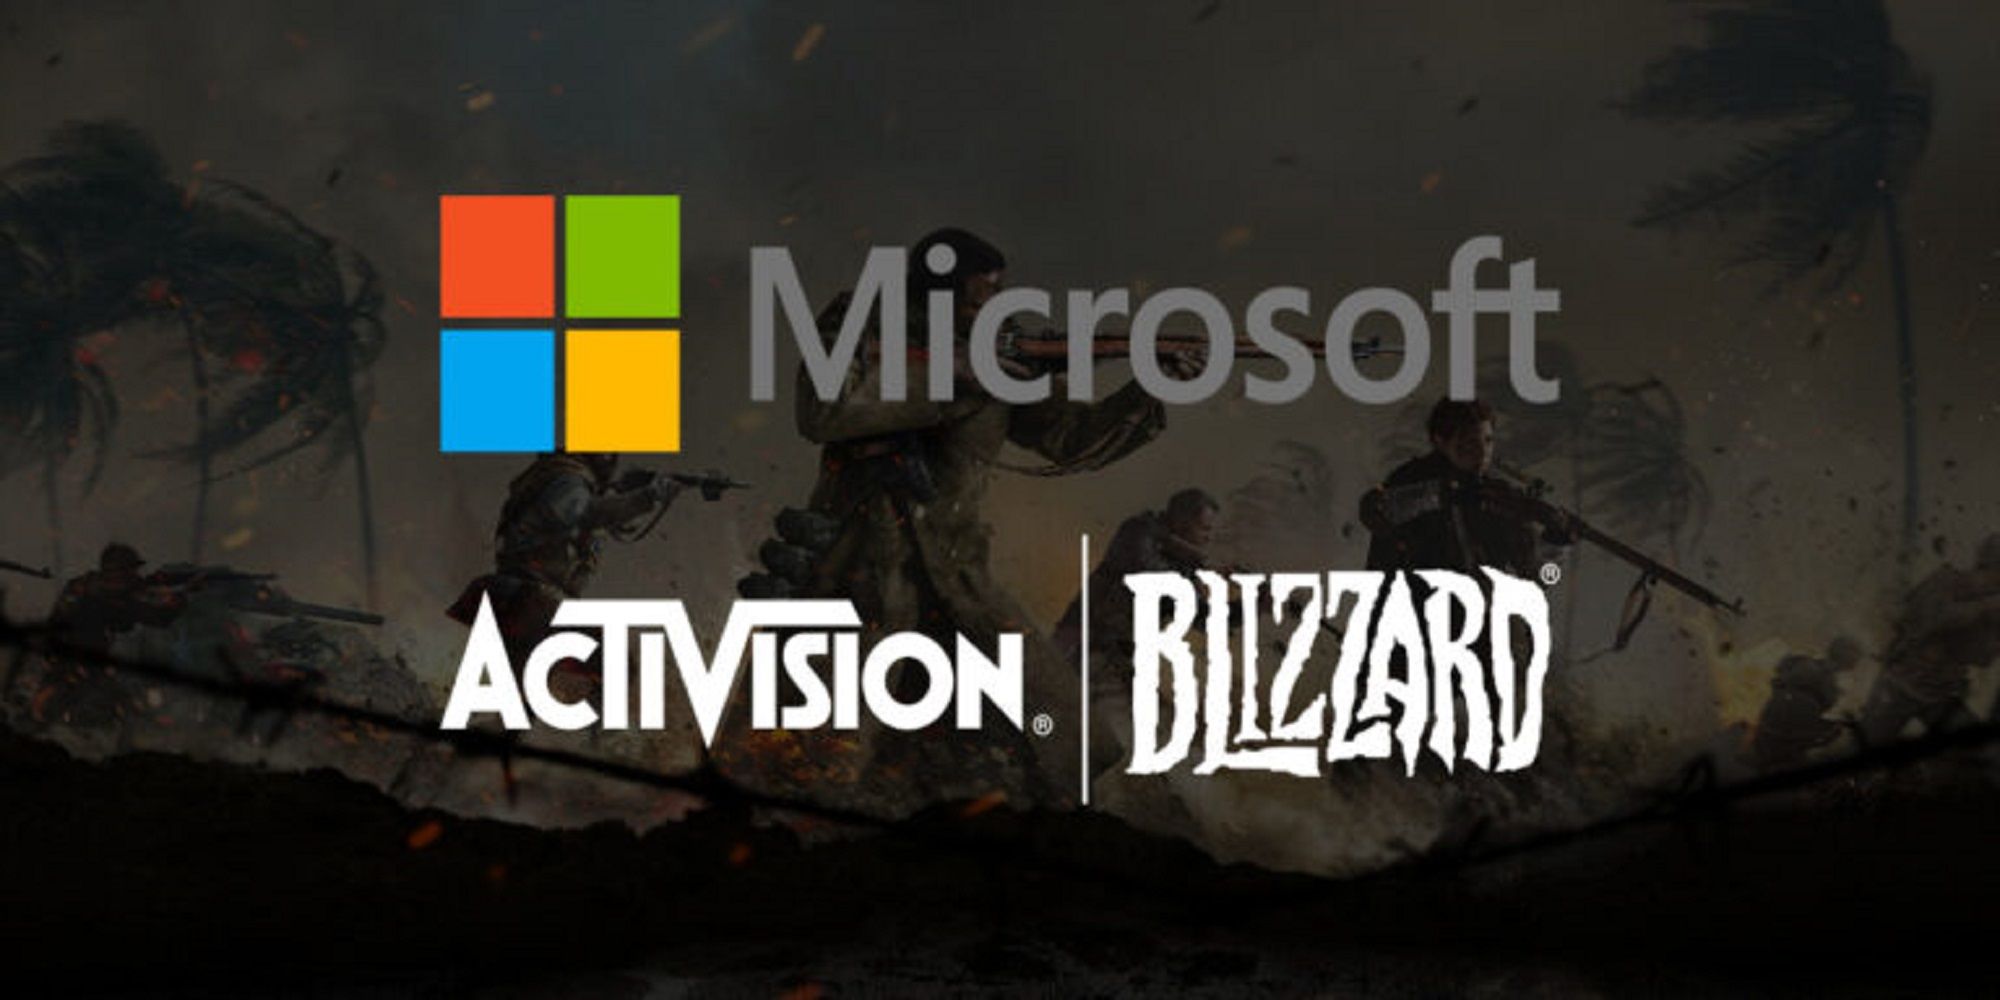 Microsoft's Activision Blizzard acquisition has gone through - Polygon